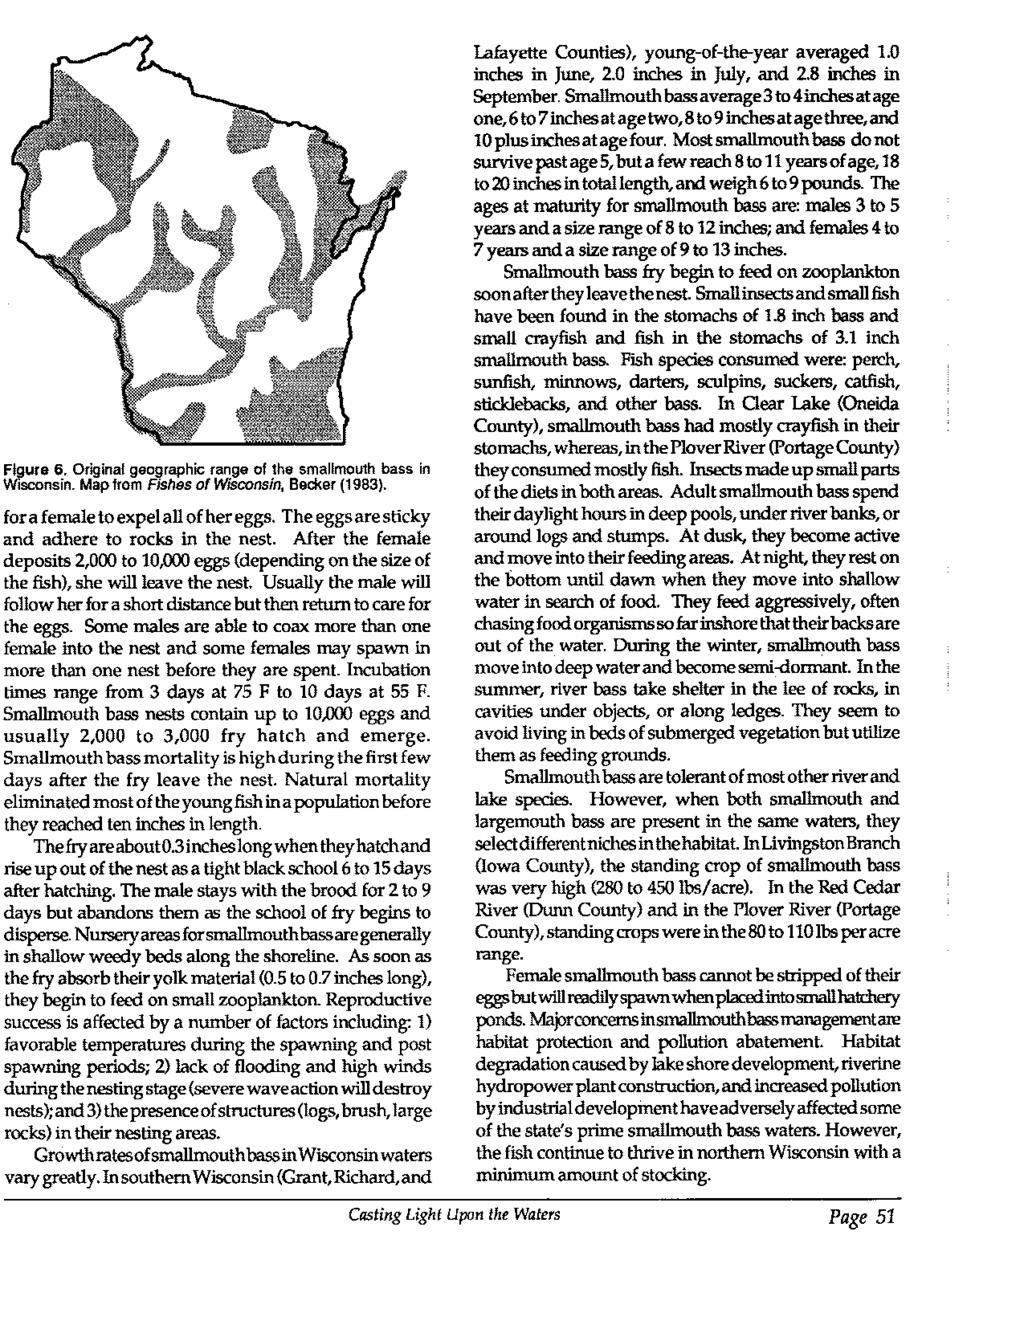 Fl9ure 6. Original geographic range of the smallmouth bass in Wisconsin. Map from Fishes of Wisconsin, Becker (1983). for a female to expel all of her eggs.